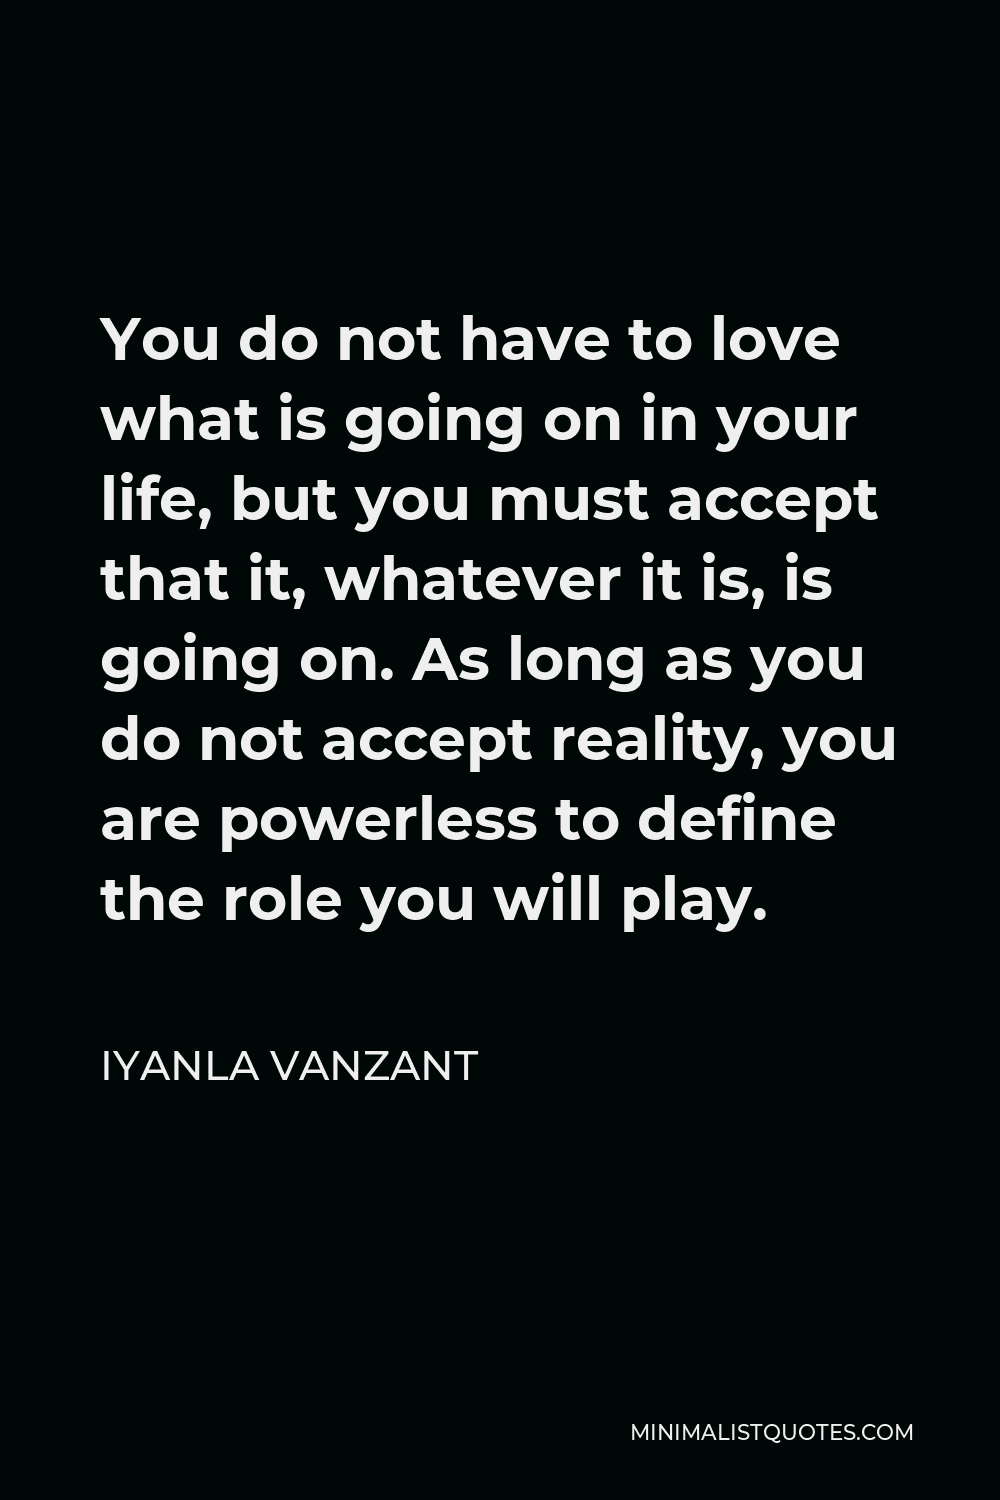 Iyanla Vanzant Quote - You do not have to love what is going on in your life, but you must accept that it, whatever it is, is going on. As long as you do not accept reality, you are powerless to define the role you will play.